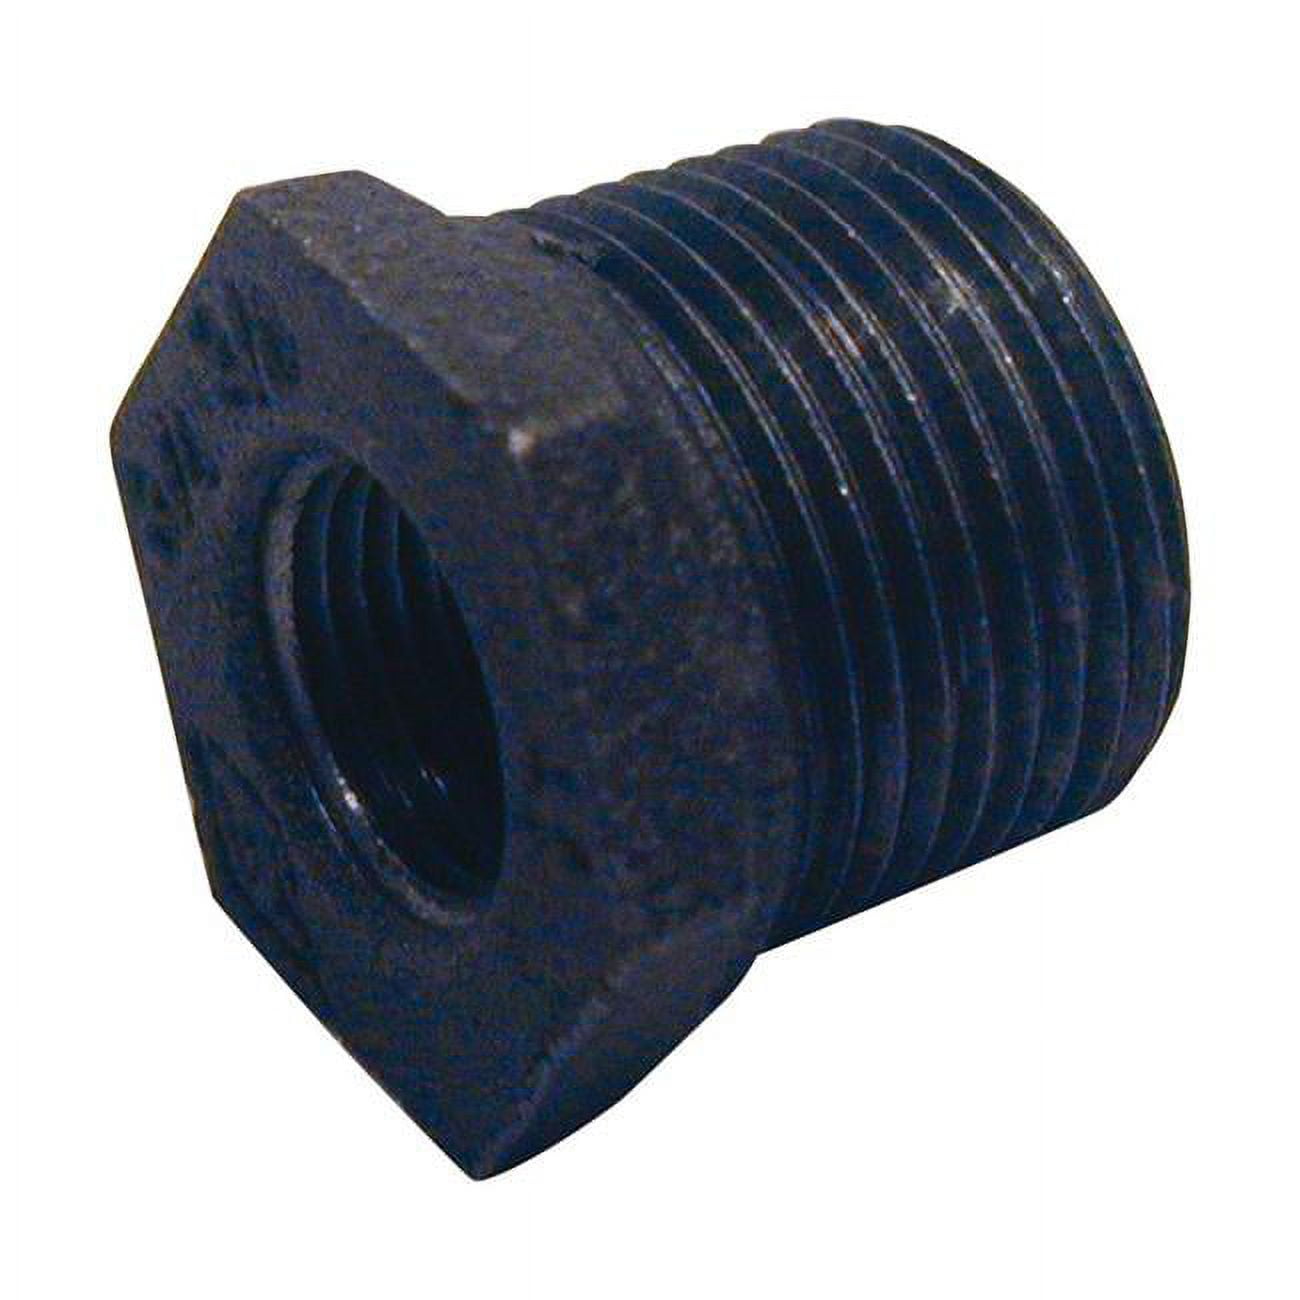 4911913 4 Male X 2.5 In. Dia. Southland Female Black Malleable Iron Hex Bushing